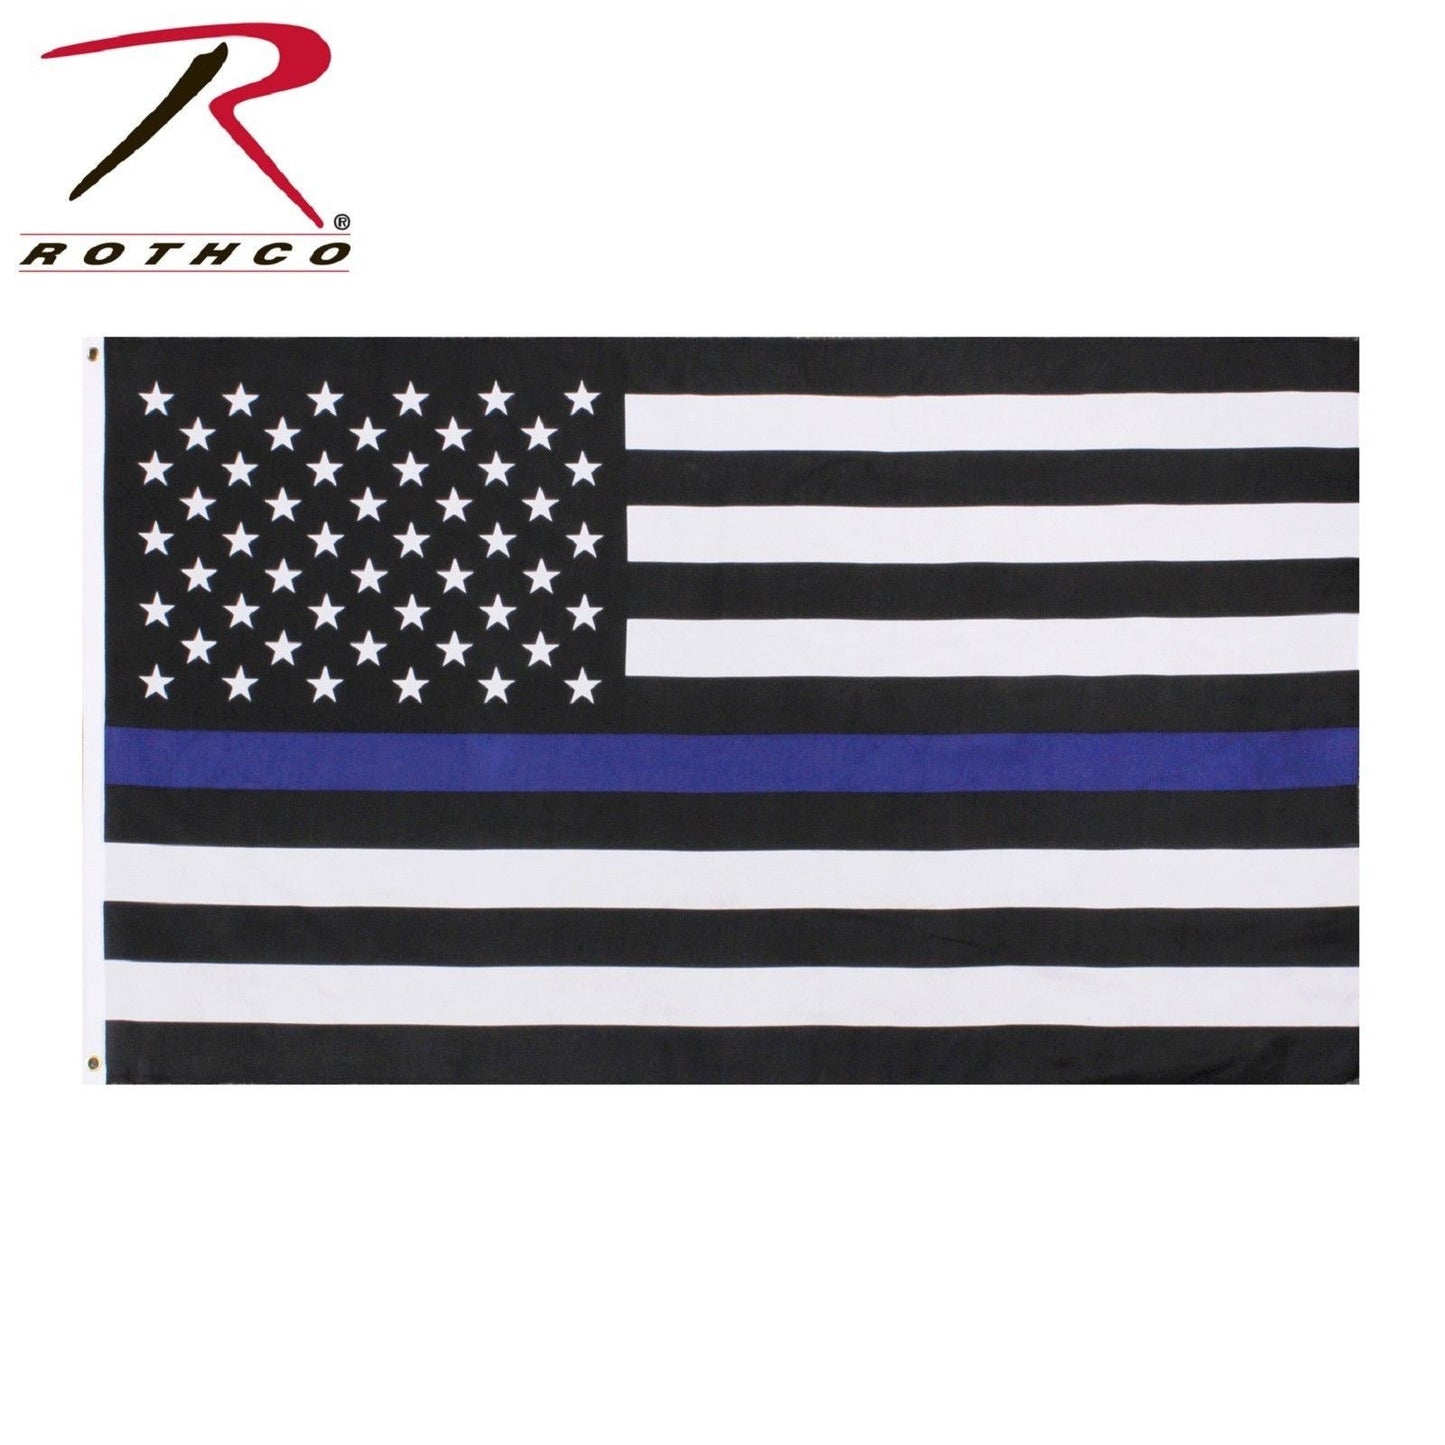 The Thin Blue Line Polyester Hanging Flag - 2' x 3' Polyester USA American Flag